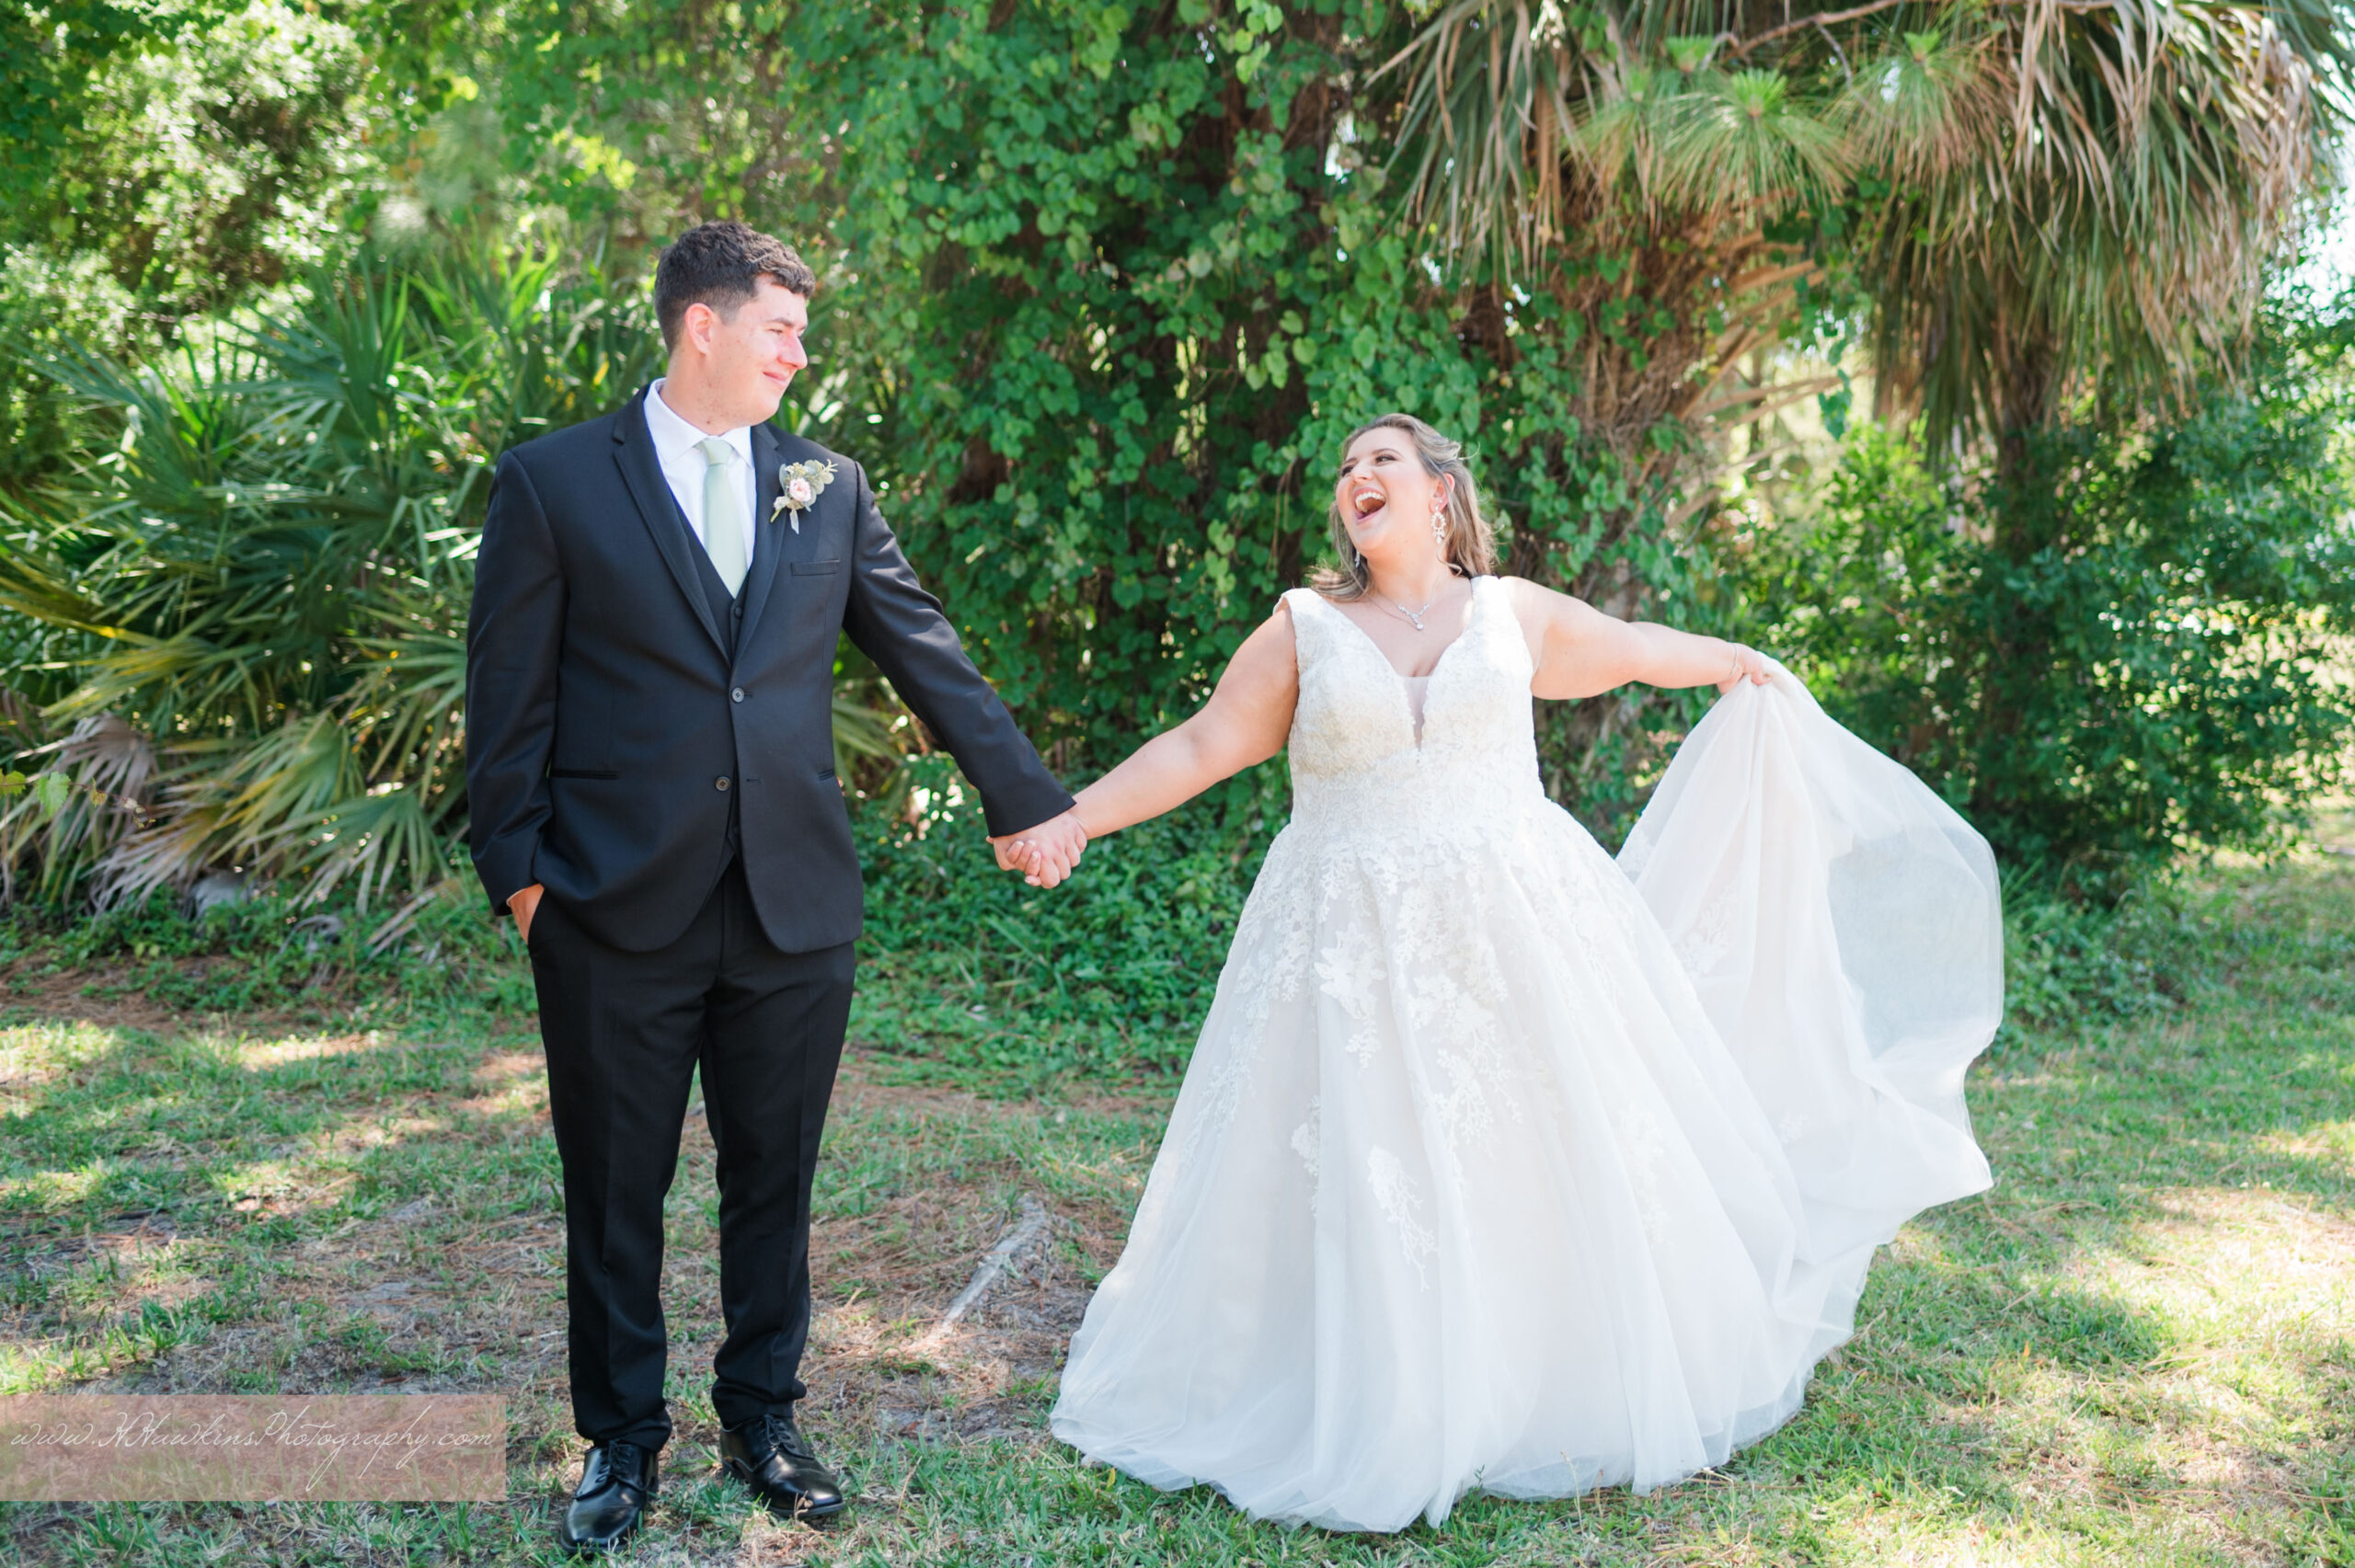 Bride and groom dance together outside Northside Presbyterian Church in Melbourne FL by Orlando wedding photographer